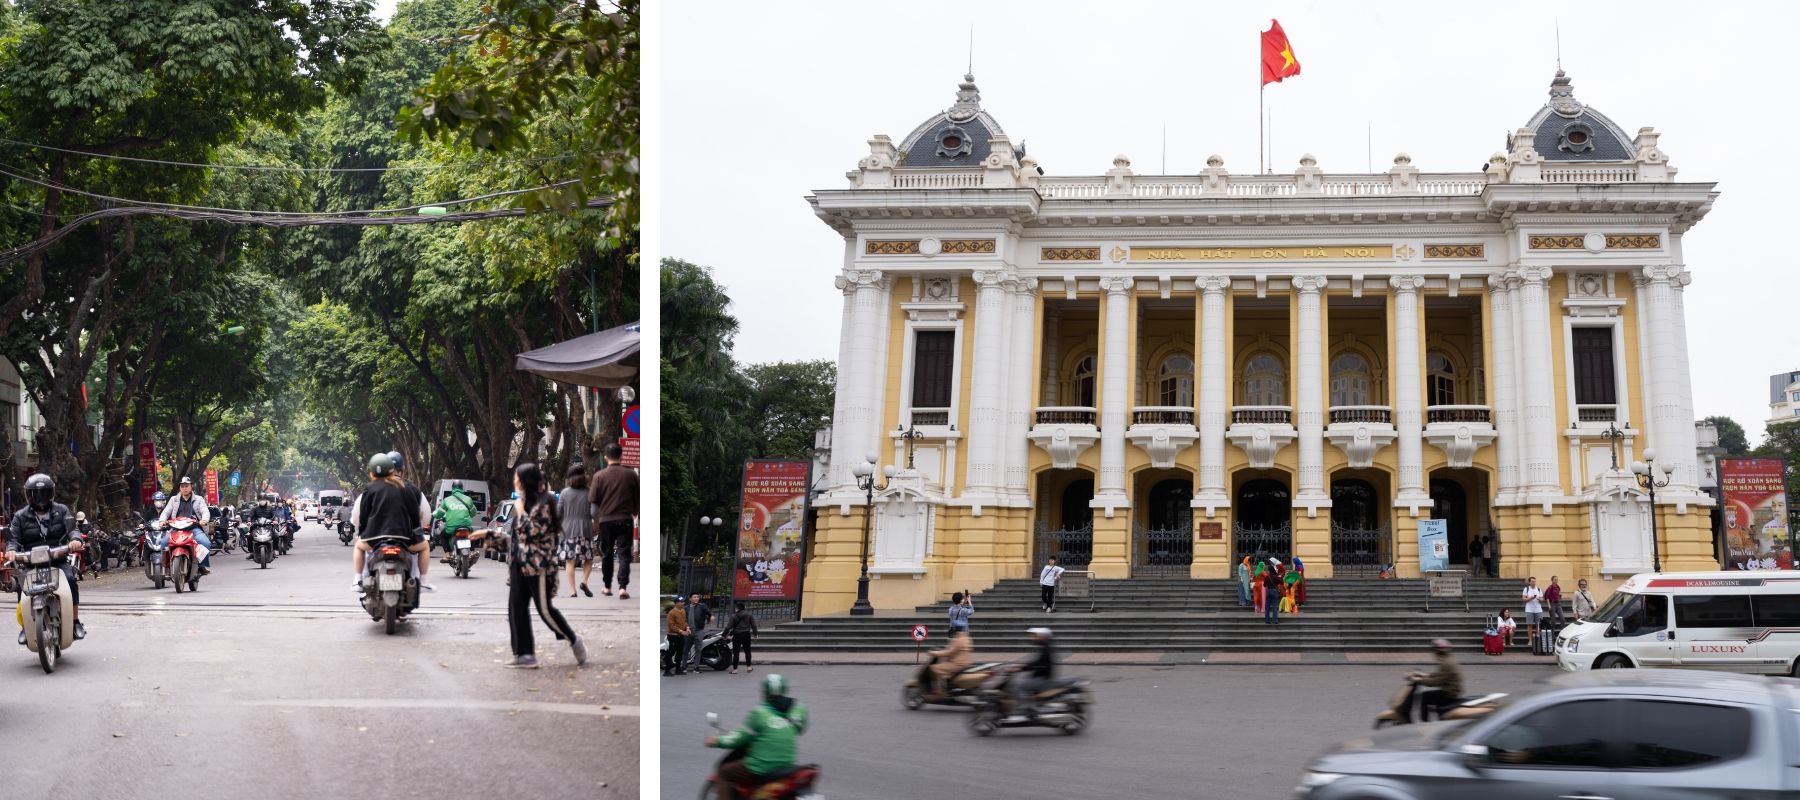 Photo of Motorbikes are still the main mode of transportation for the residents of Hanoi, but automobiles are increasing (left). Completed in 1911, the Hanoi Opera House  boasts a history of over 100 years. In the developing city of Hanoi, it is one of the remaining structures conveying the charm of old Vietnam (right).